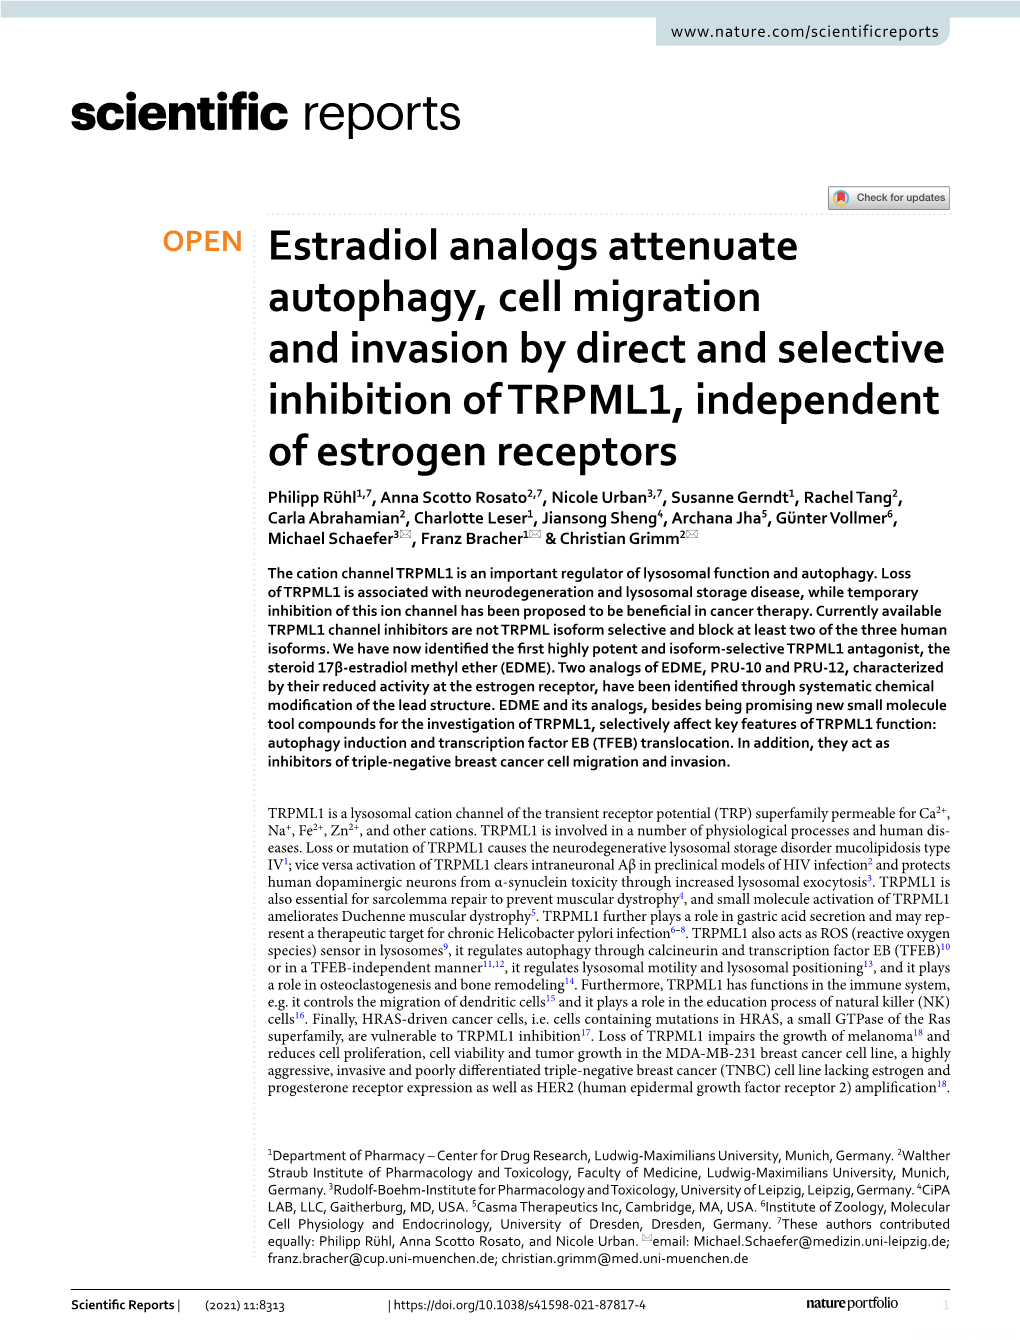 Estradiol Analogs Attenuate Autophagy, Cell Migration And